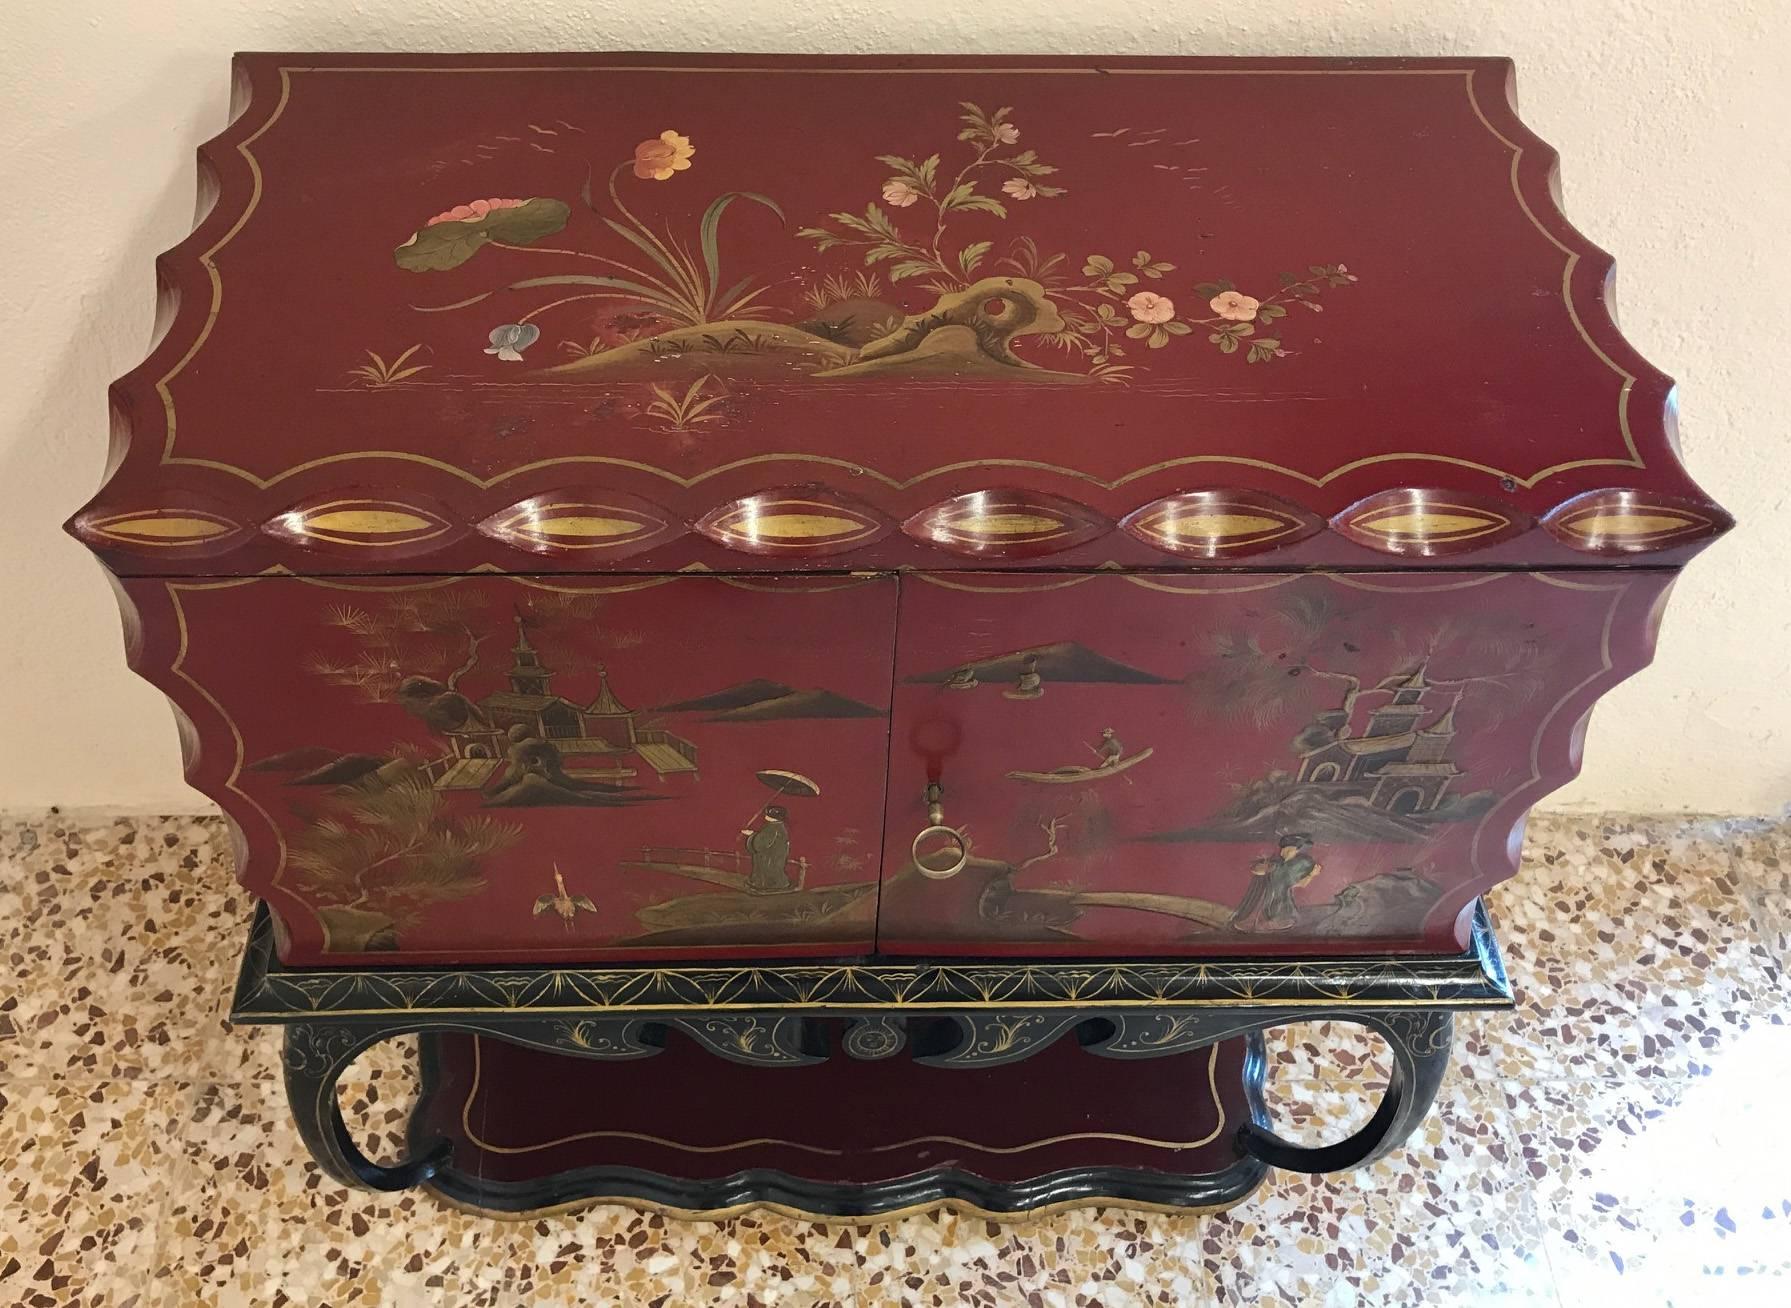 Entirely lacquered cabinet with chinoiserie decoration. Inside bar compartment with and mirrors.